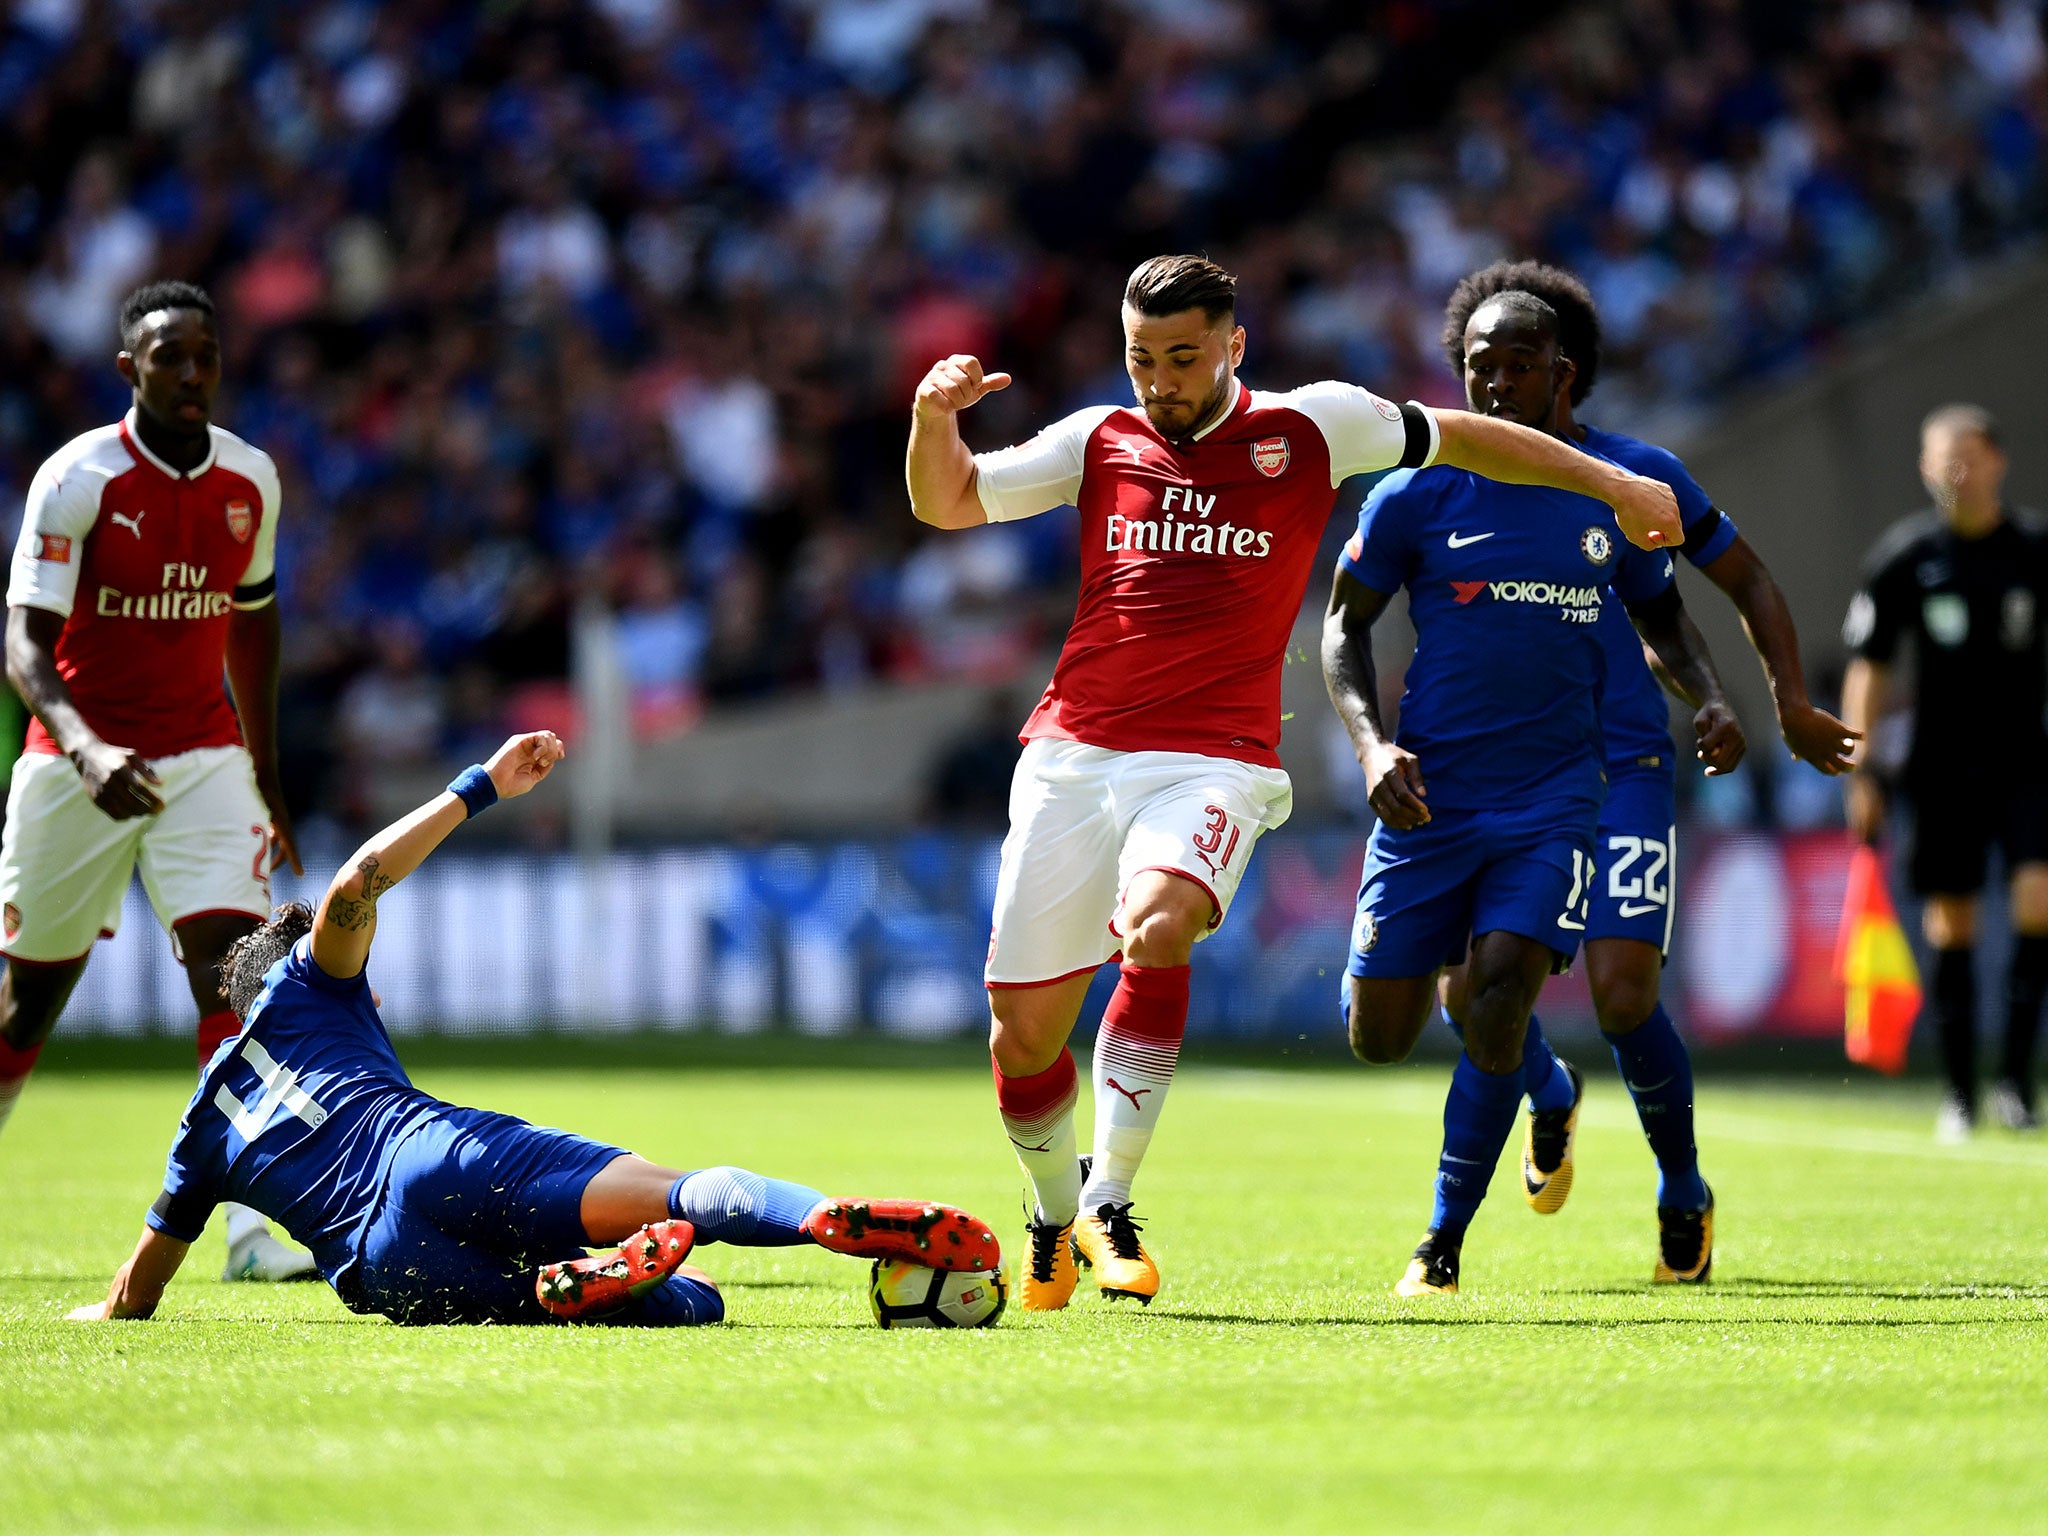 Sead Kolasinac was brought into the fray after Per Mertesacker was taken off with injury